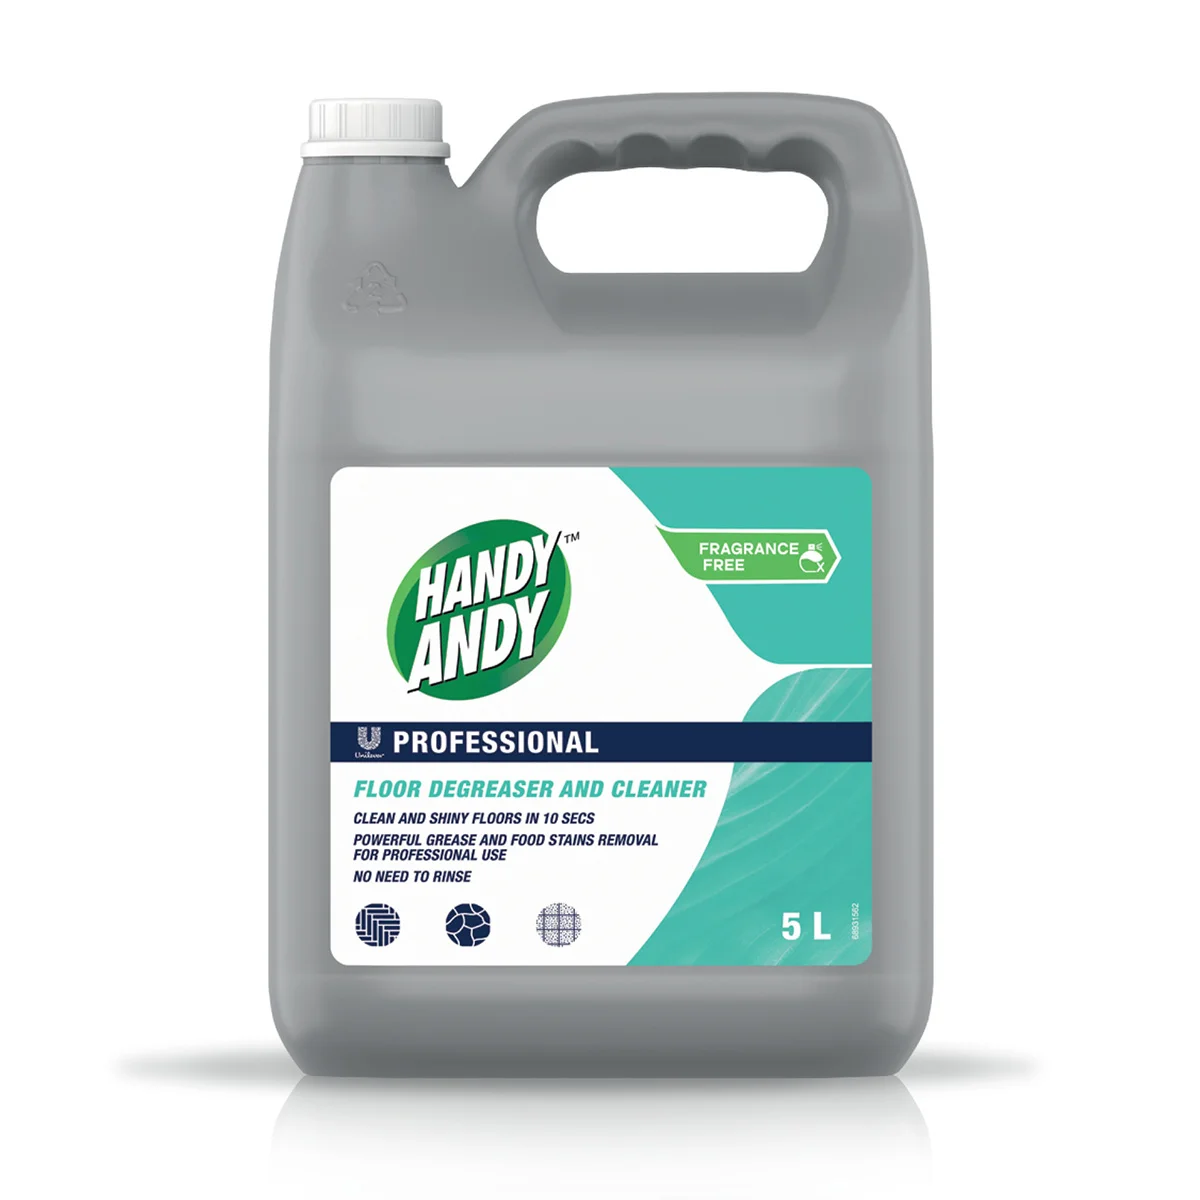 Handy Andy Professional Floor Degreaser and Cleaner 5 L